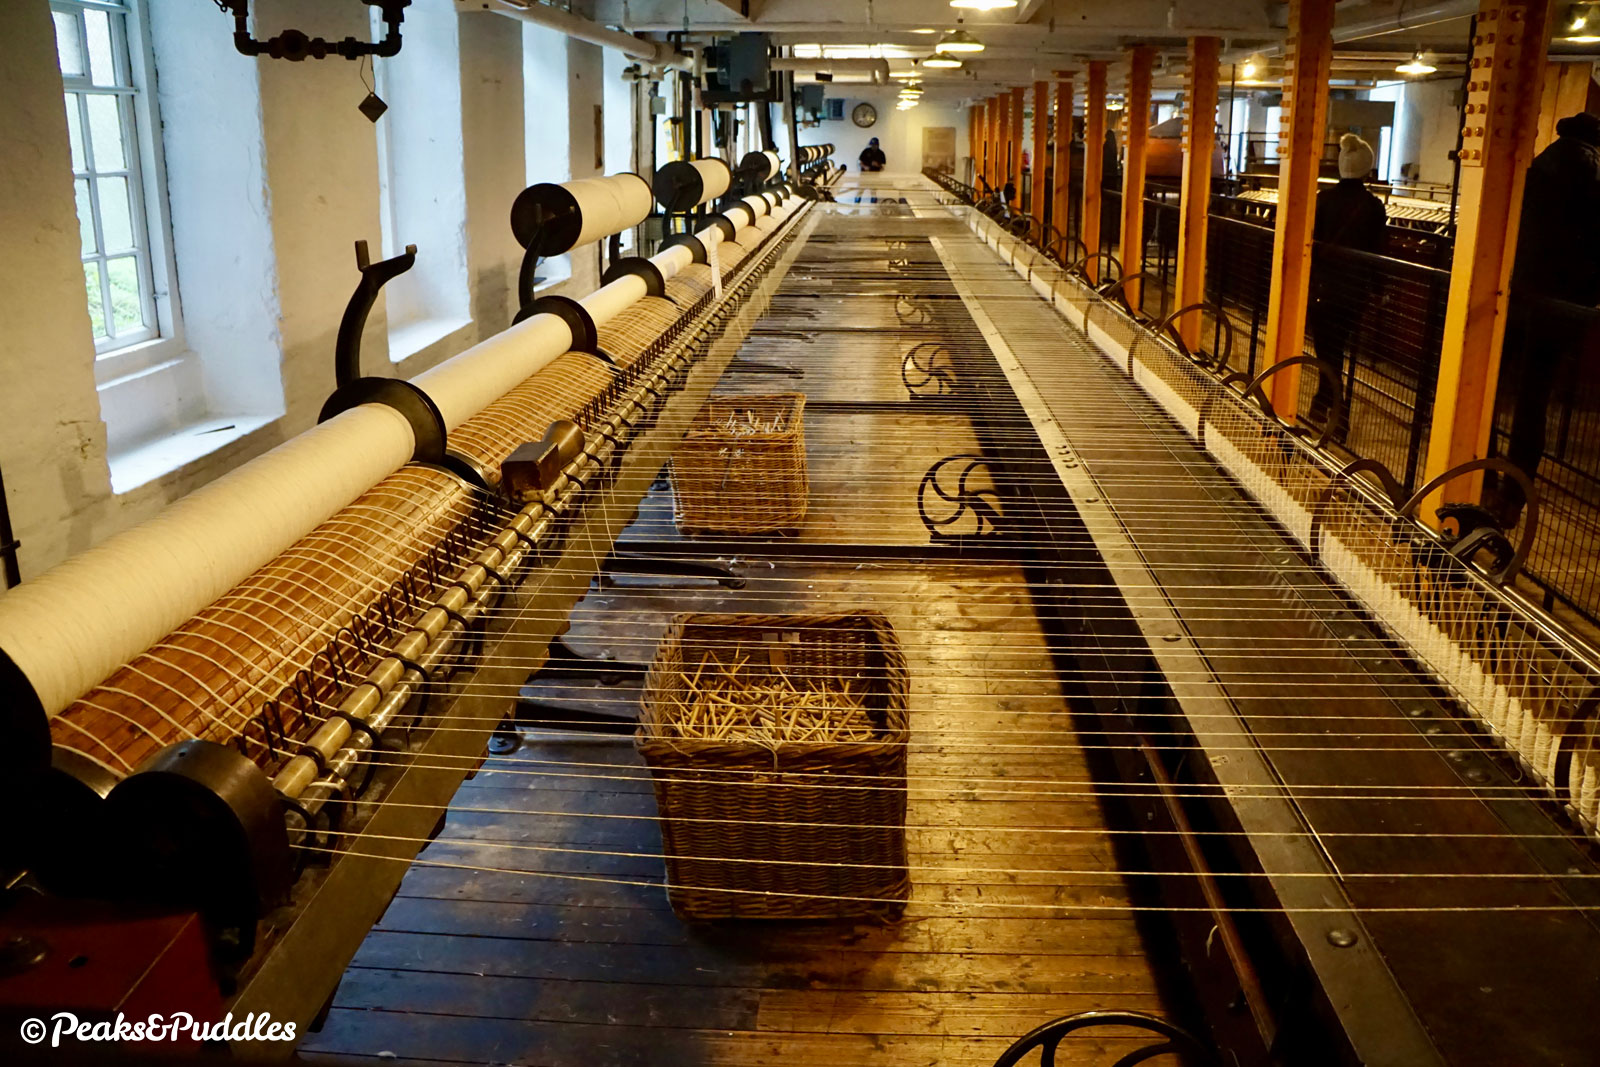 Enormous, dangerous cotton spinning machines inside Quarry Bank Mill (entry fee required).